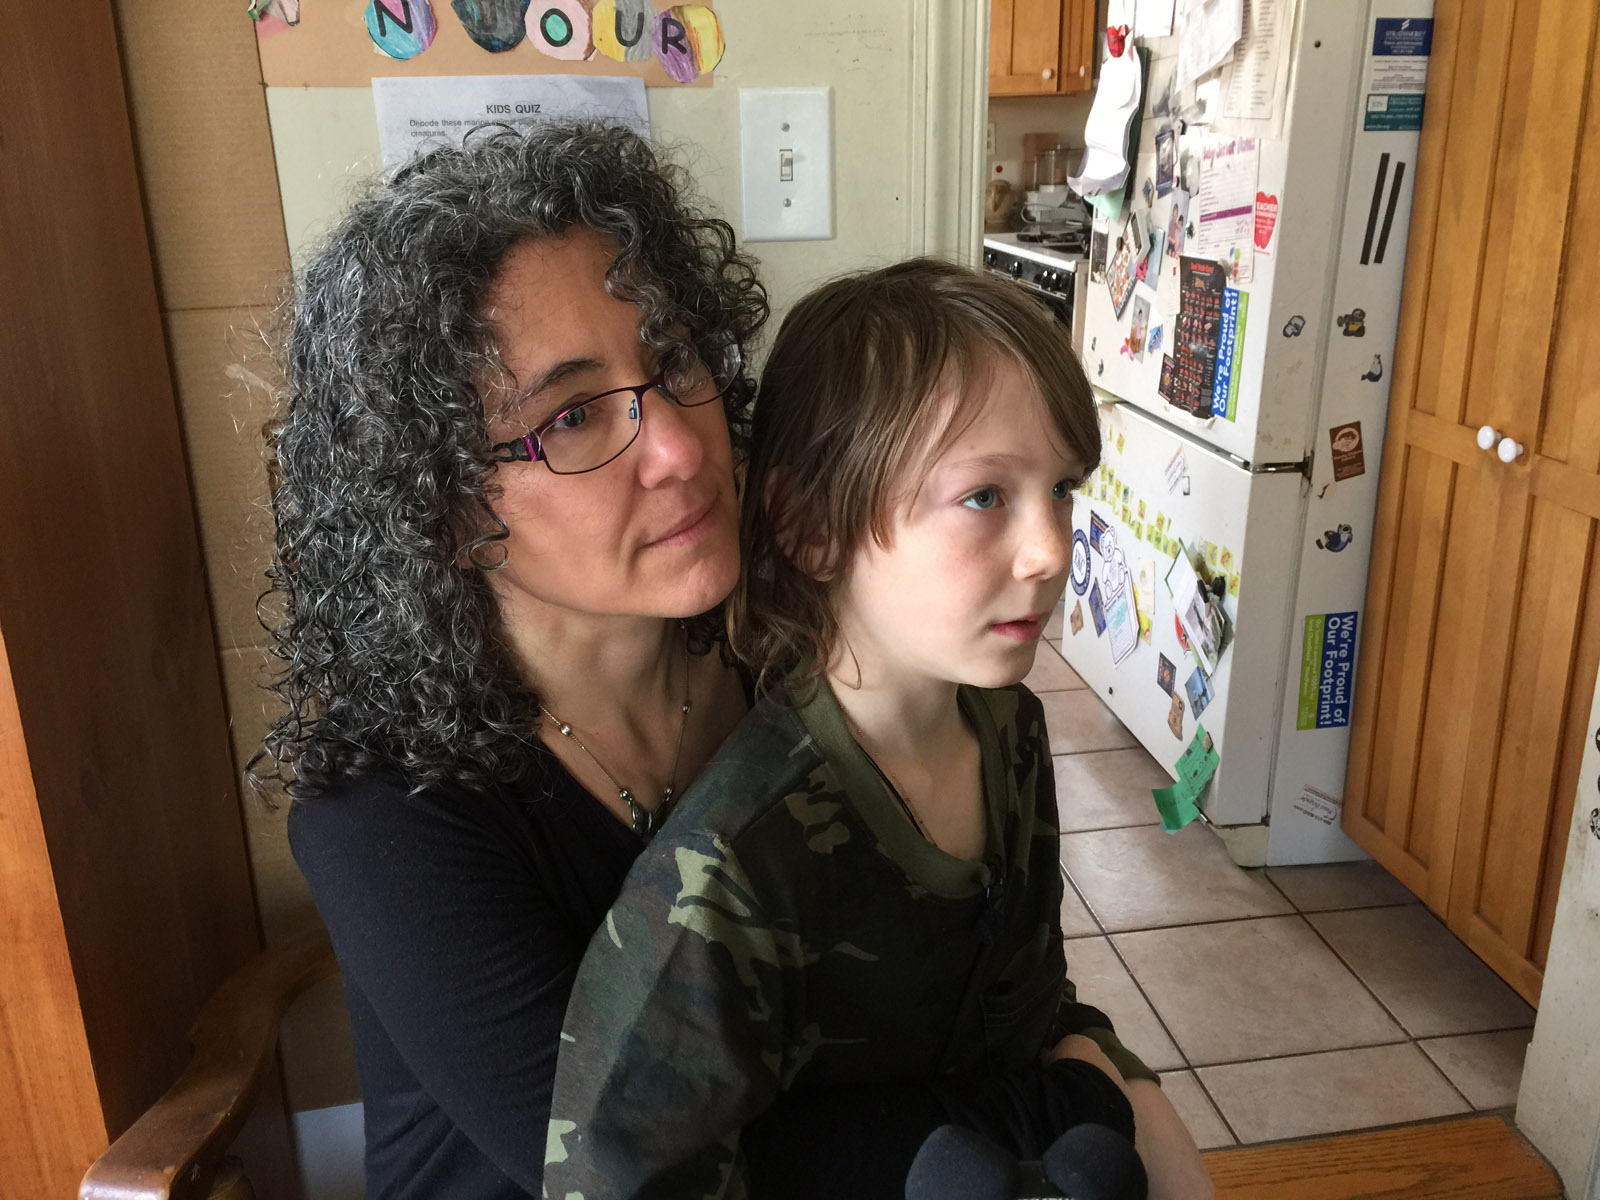 Free-range mom speaks out: We’re being harassed